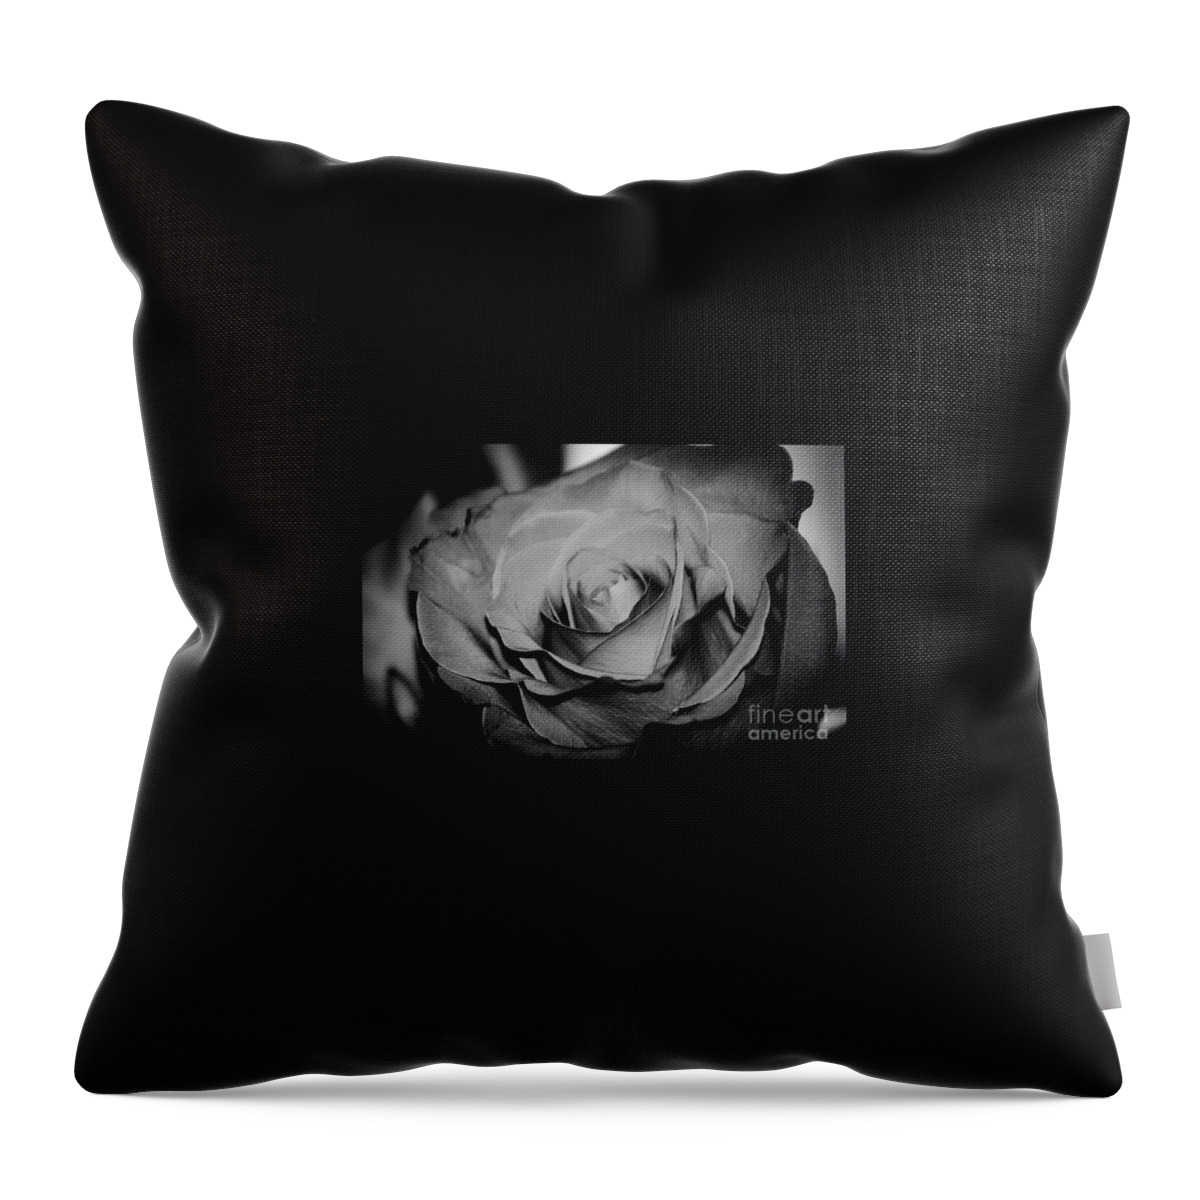 Black And White Rose Throw Pillow featuring the photograph Rose by Deena Withycombe